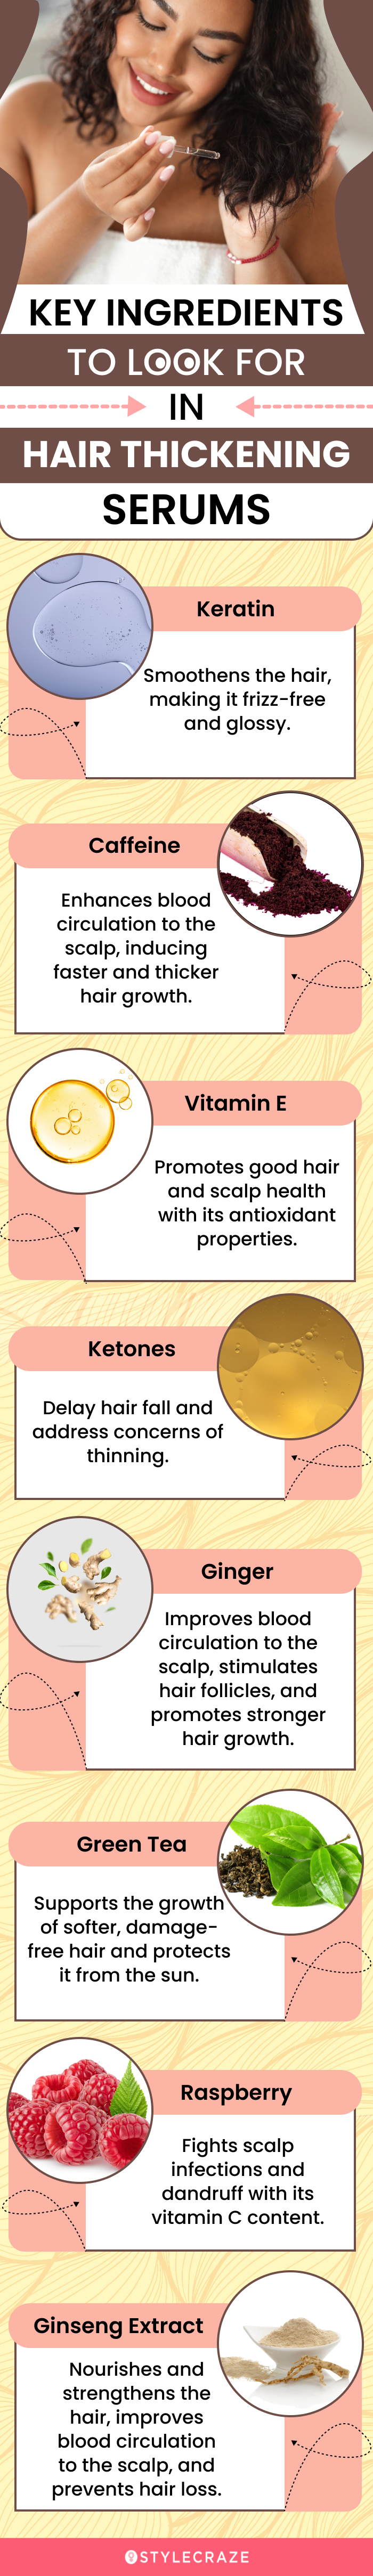 Key Ingredients To Look For In Hair Thickening Serums (infographic)